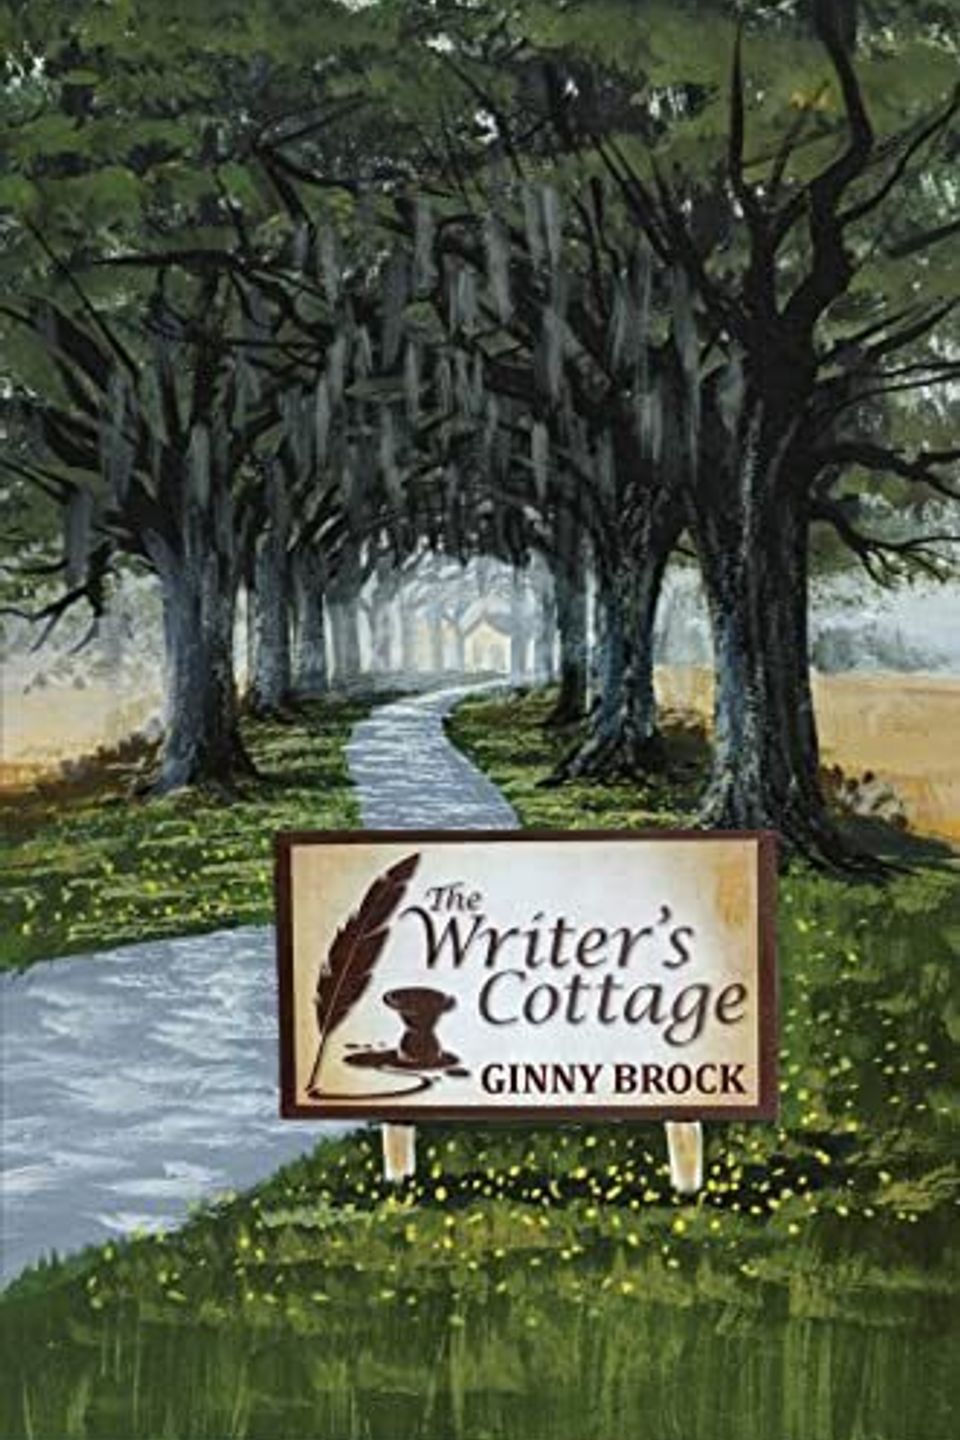 The writer's cottage